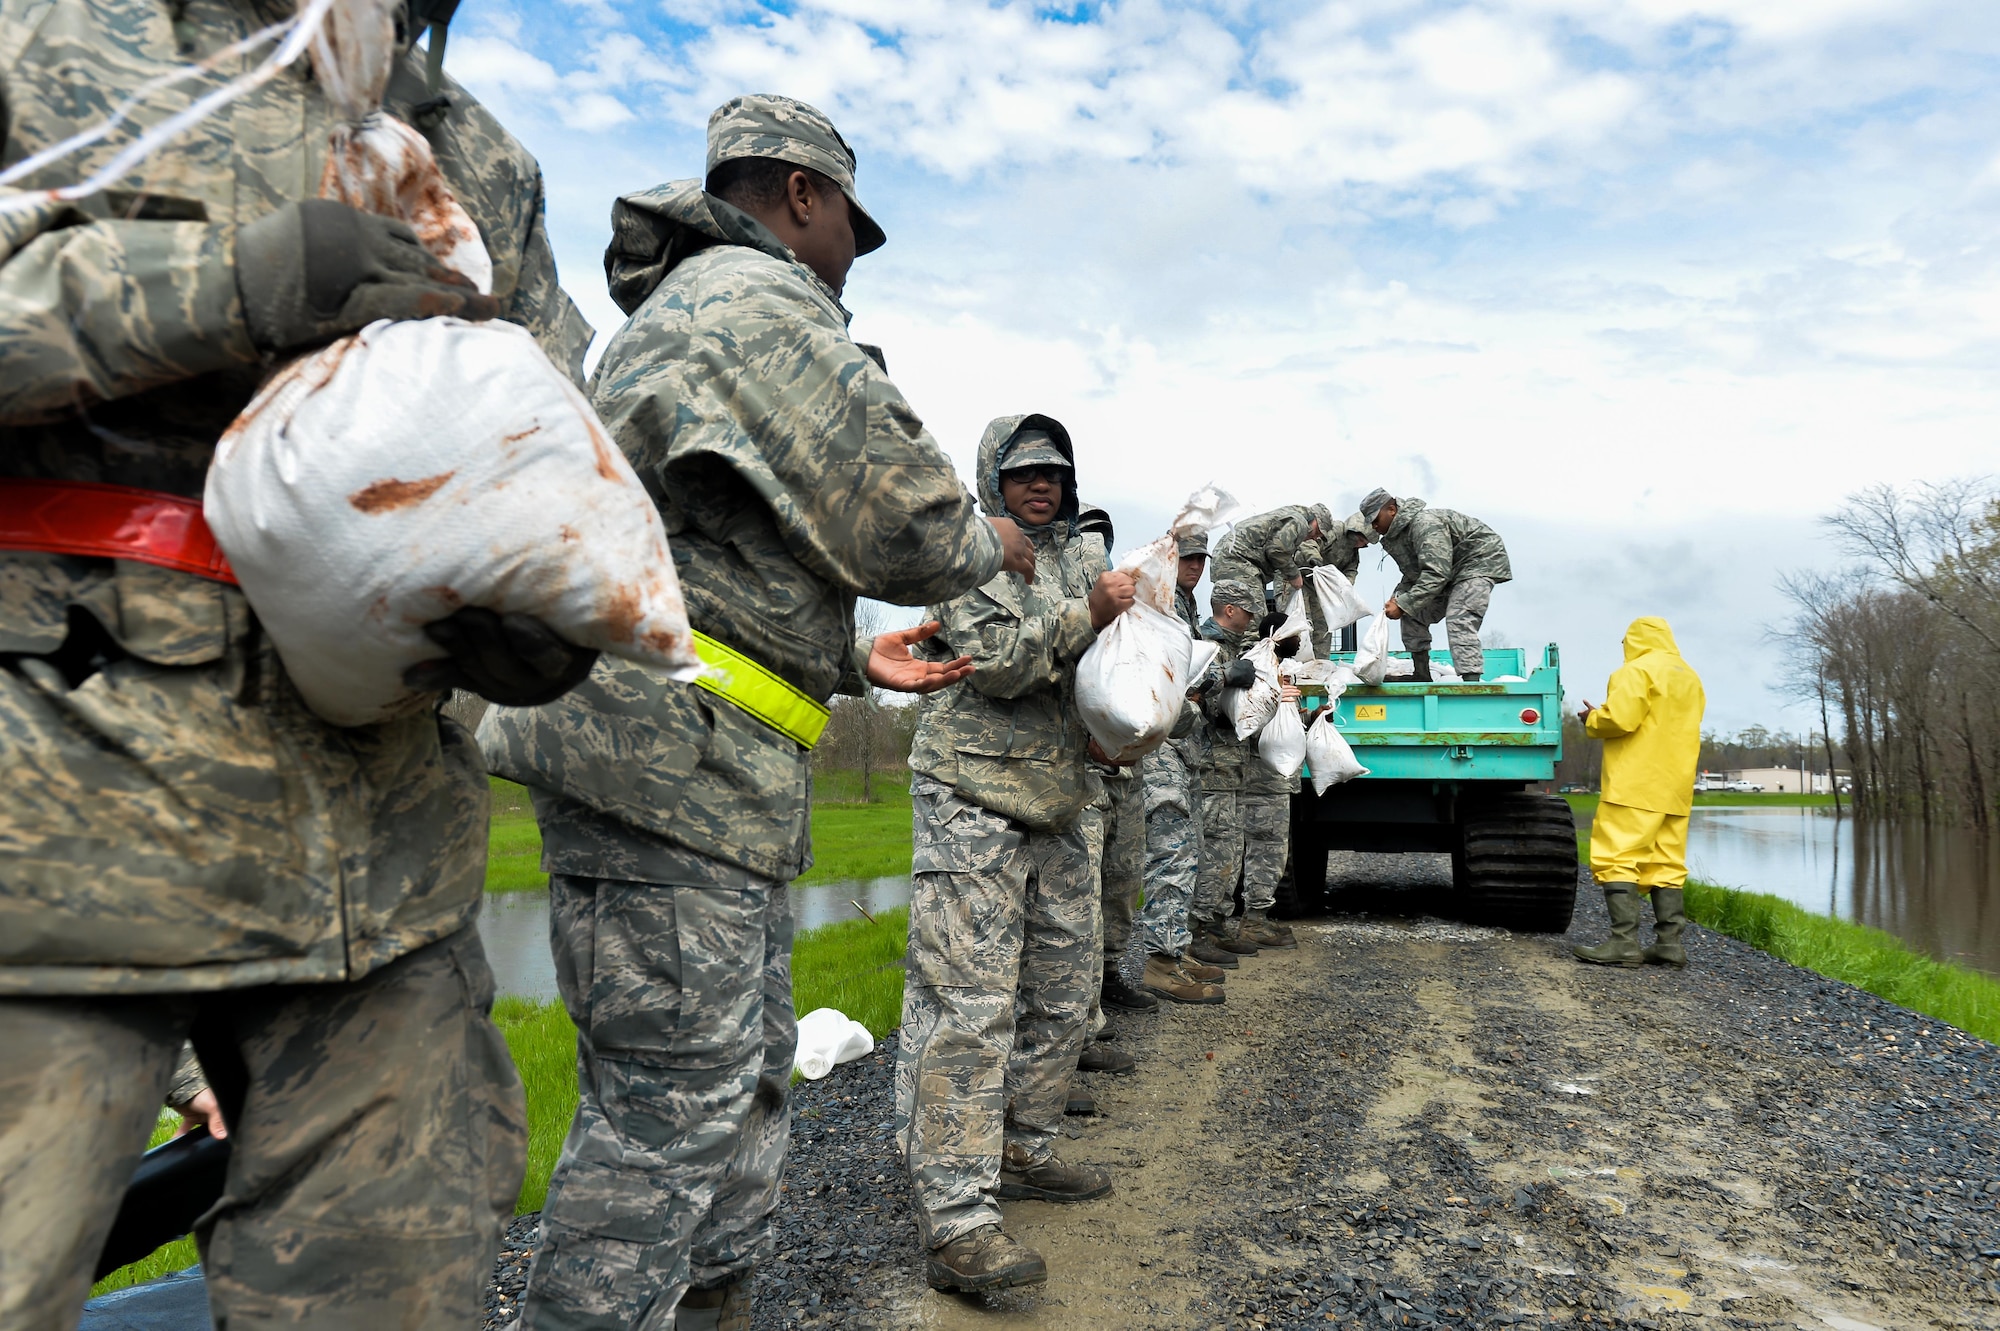 Barksdale Airmen unload sandbags from a city vehicle in Bossier City; La.; March 10; 2016. Airmen created a protective barrier over The Red Chute Bayou levee in an attempt to slow down corrosion caused from excess waters flowing down from the ArkLaTex region. (U.S. Air Force photo/Senior Airman Mozer O. Da Cunha)